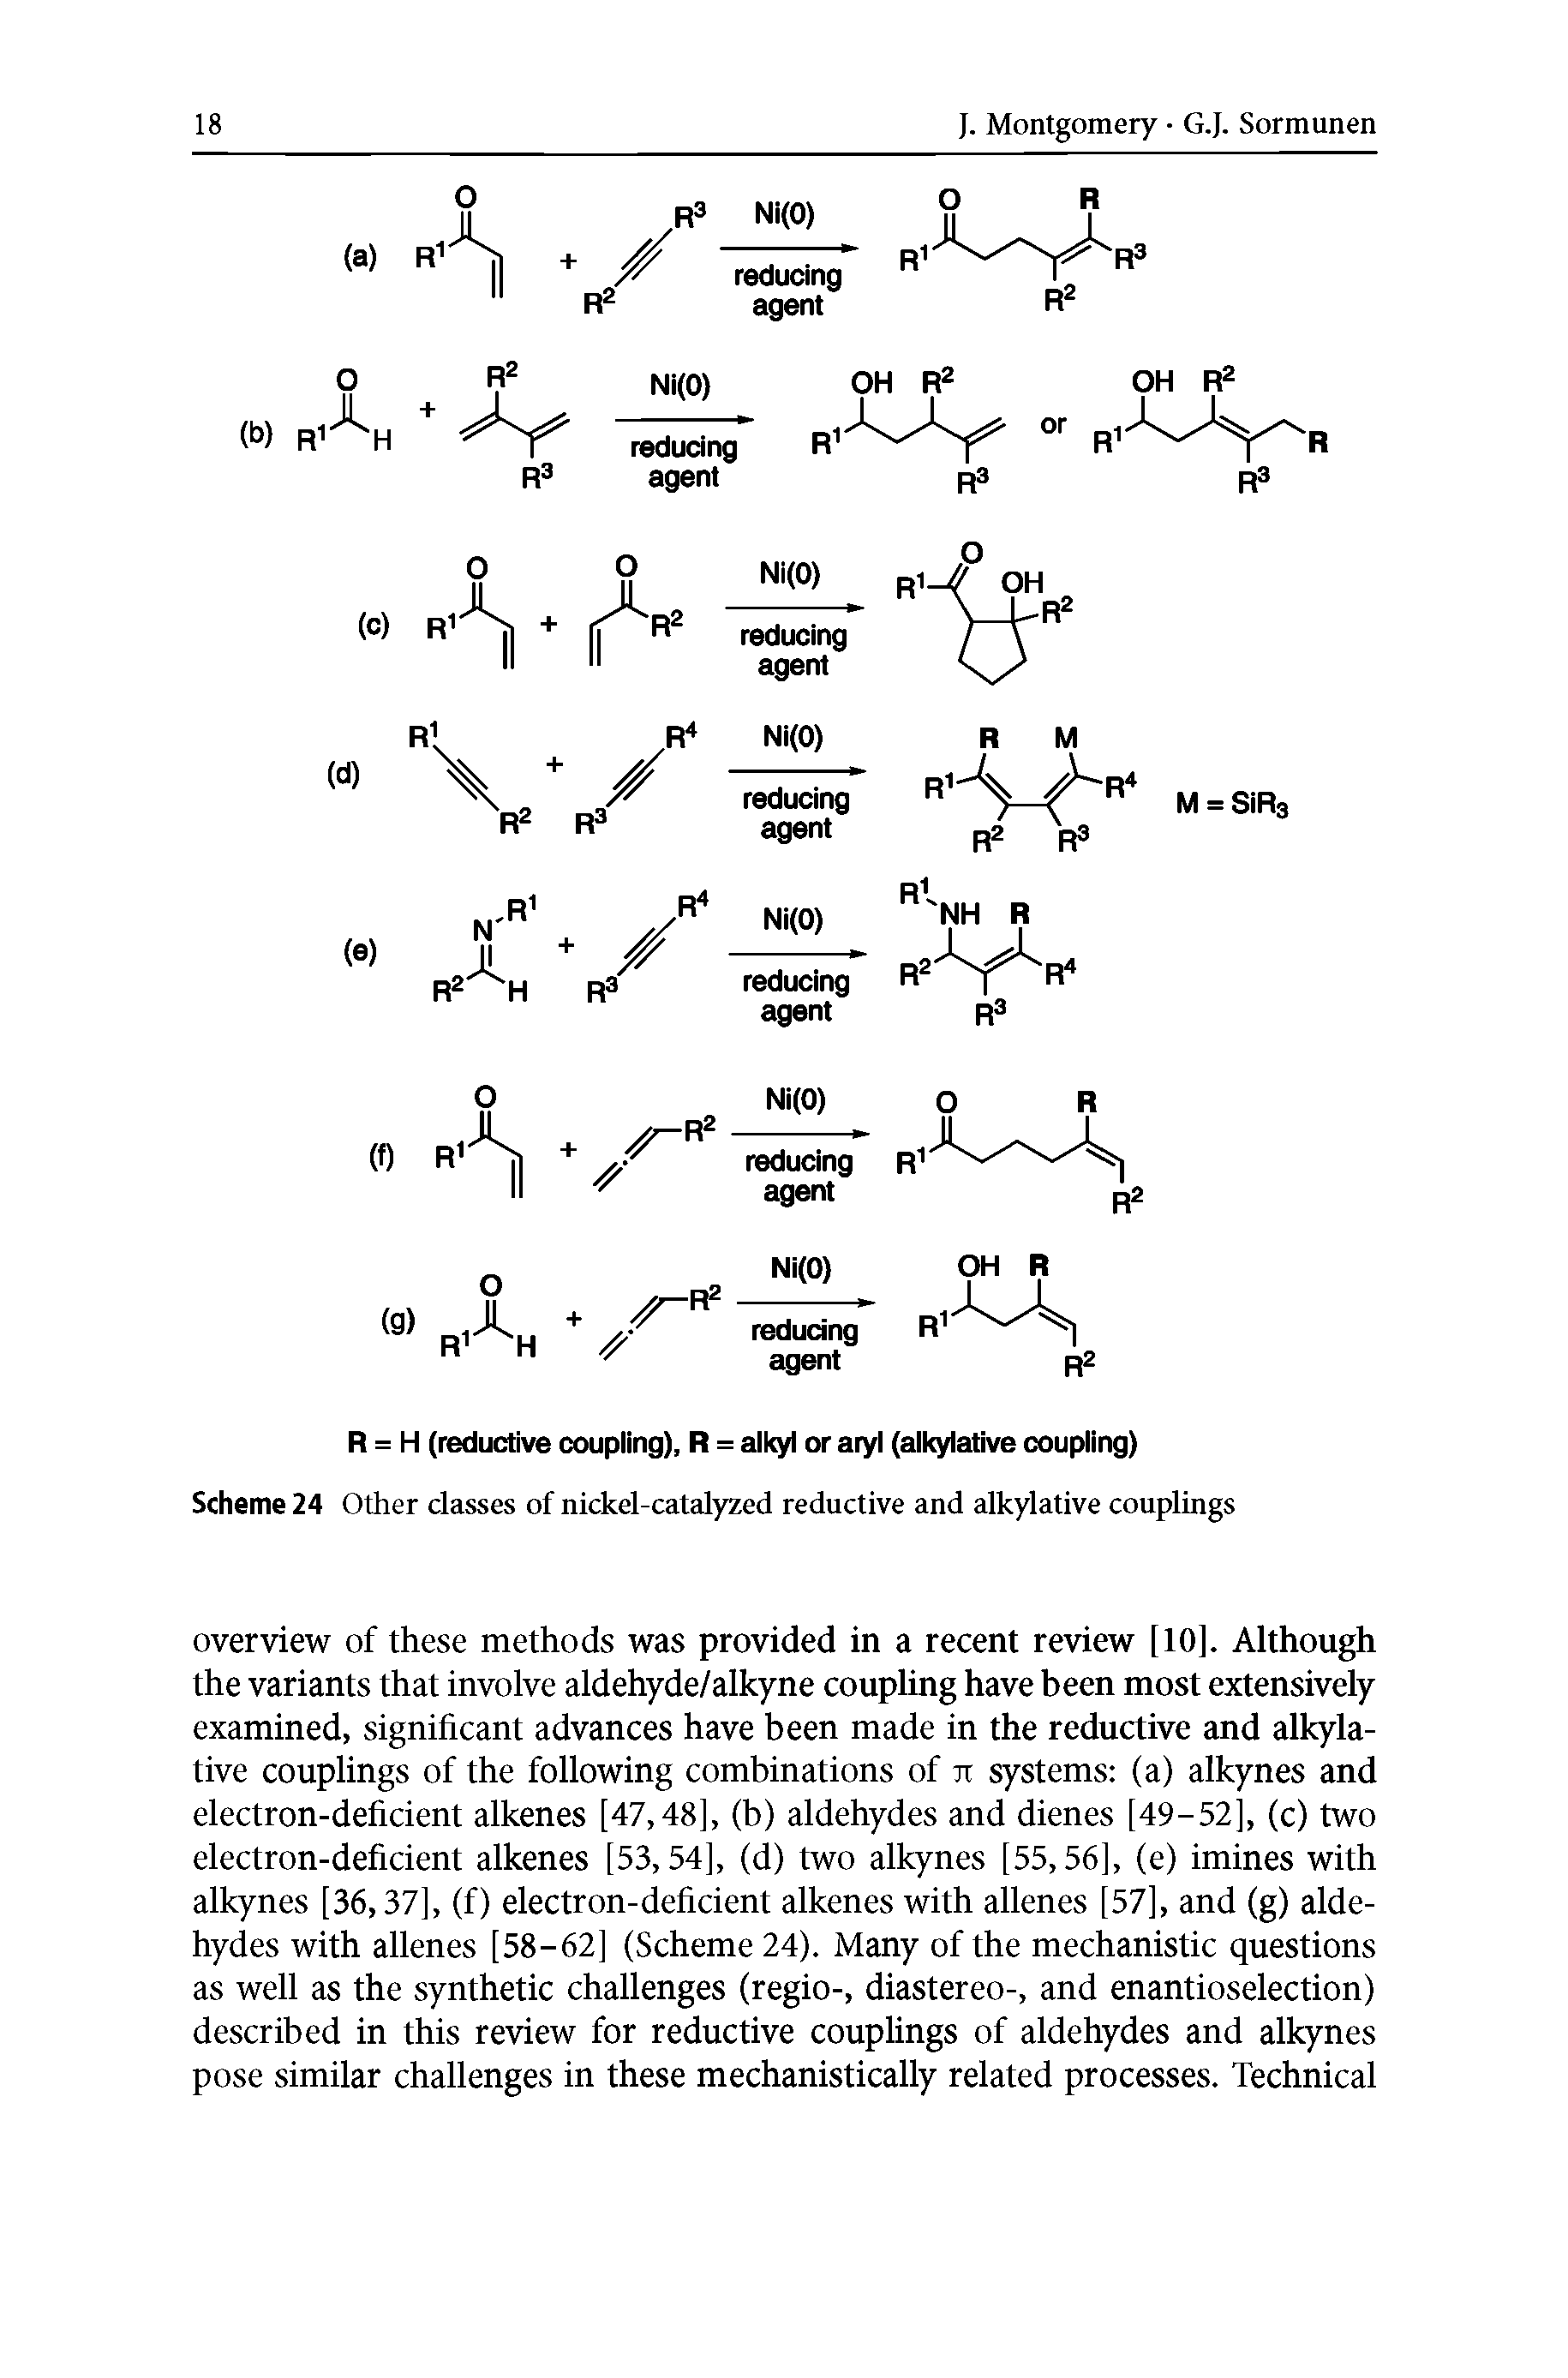 Scheme 24 Other classes of nickel-catalyzed reductive and alkylative couplings...